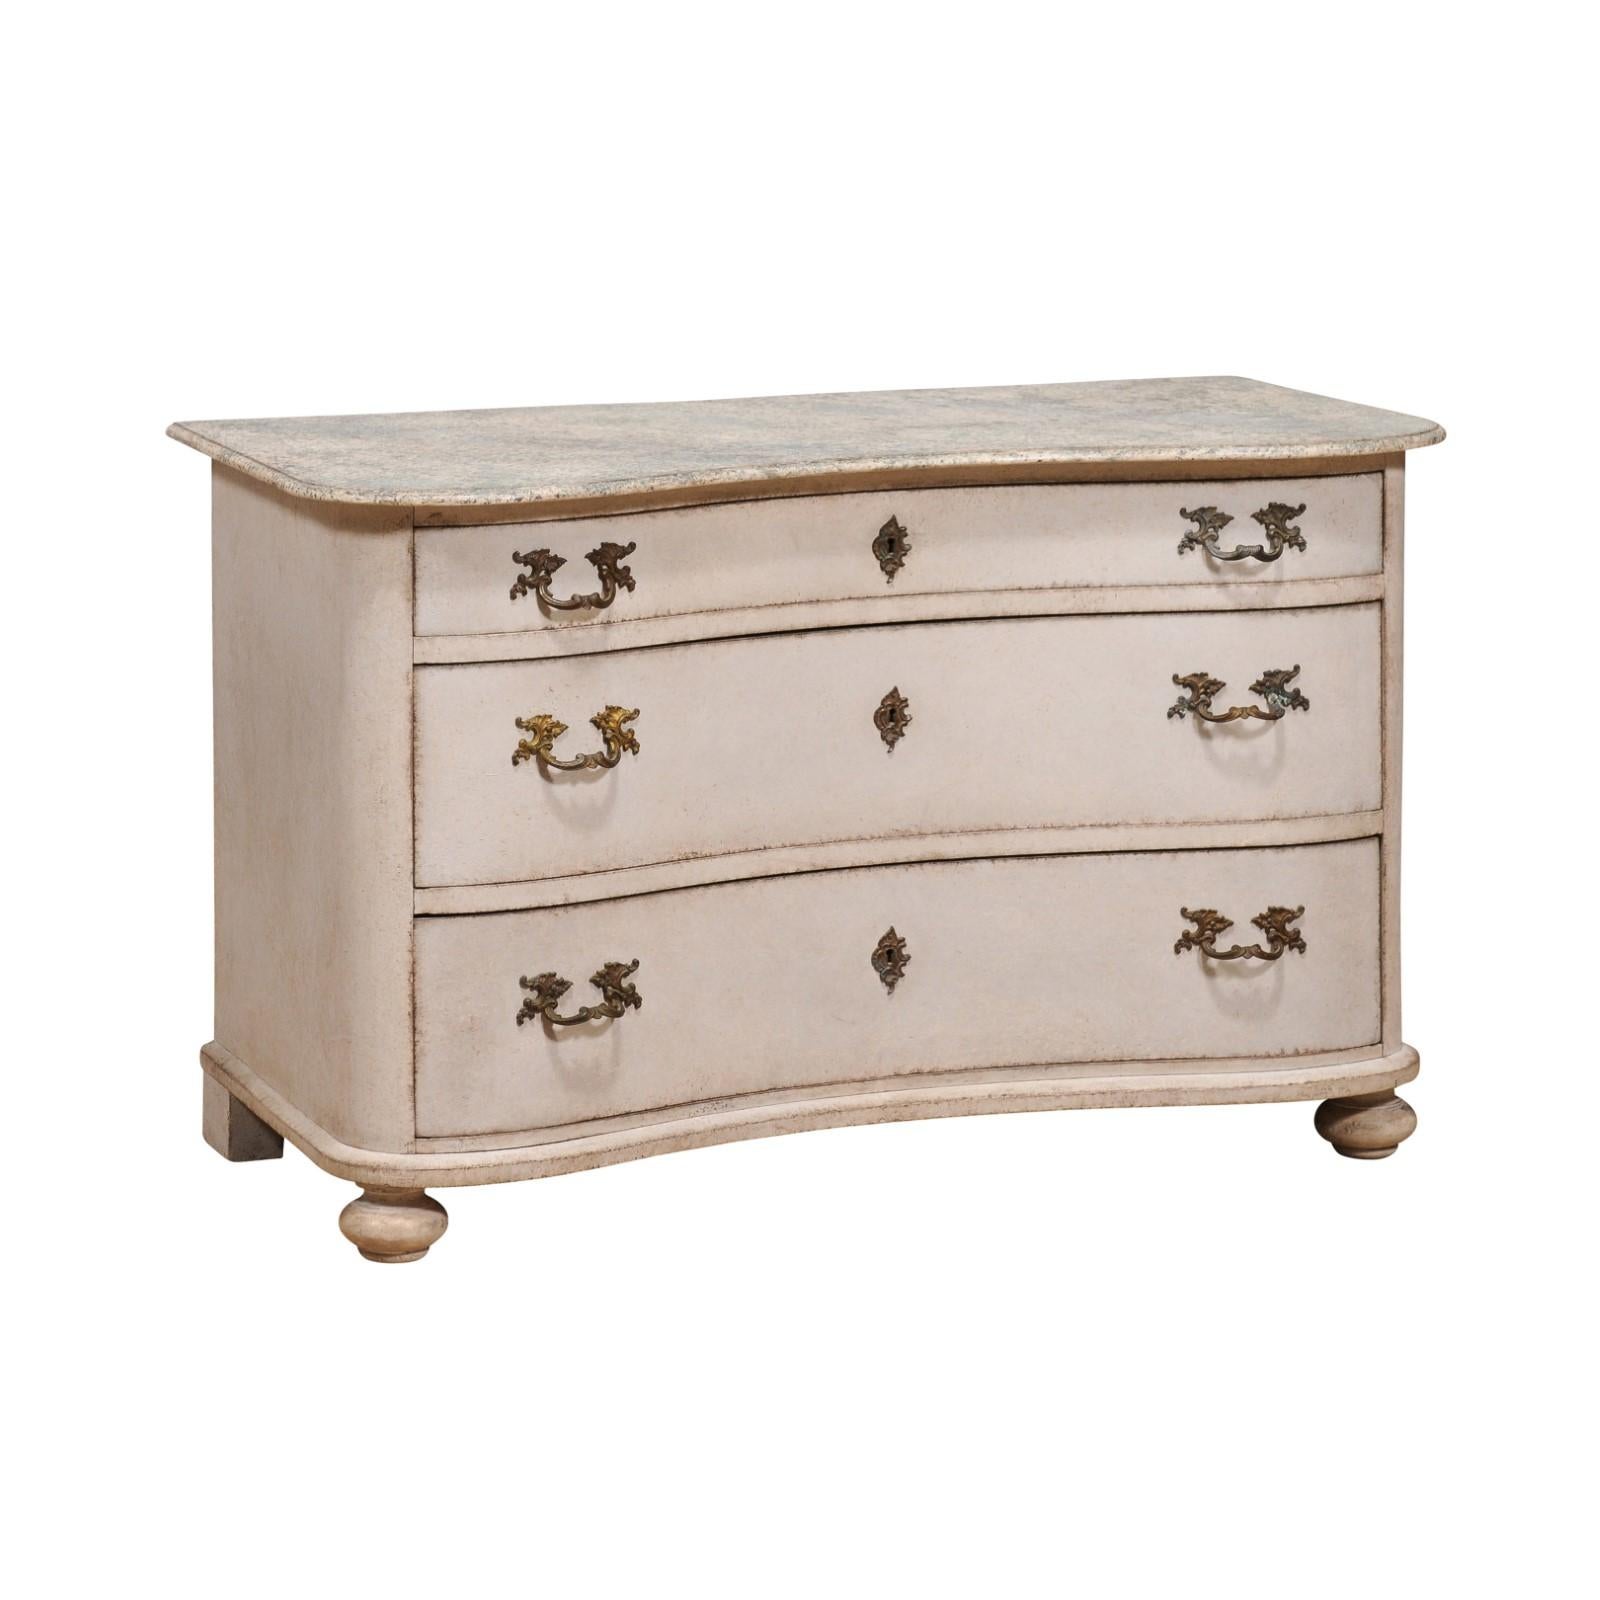 A Swedish Baroque style serpentine front three-drawer chest from the 19th century with light gray painted finish, marbleized top and turned feet. This 19th-century Swedish Baroque style serpentine front three-drawer chest is a stunning amalgamation